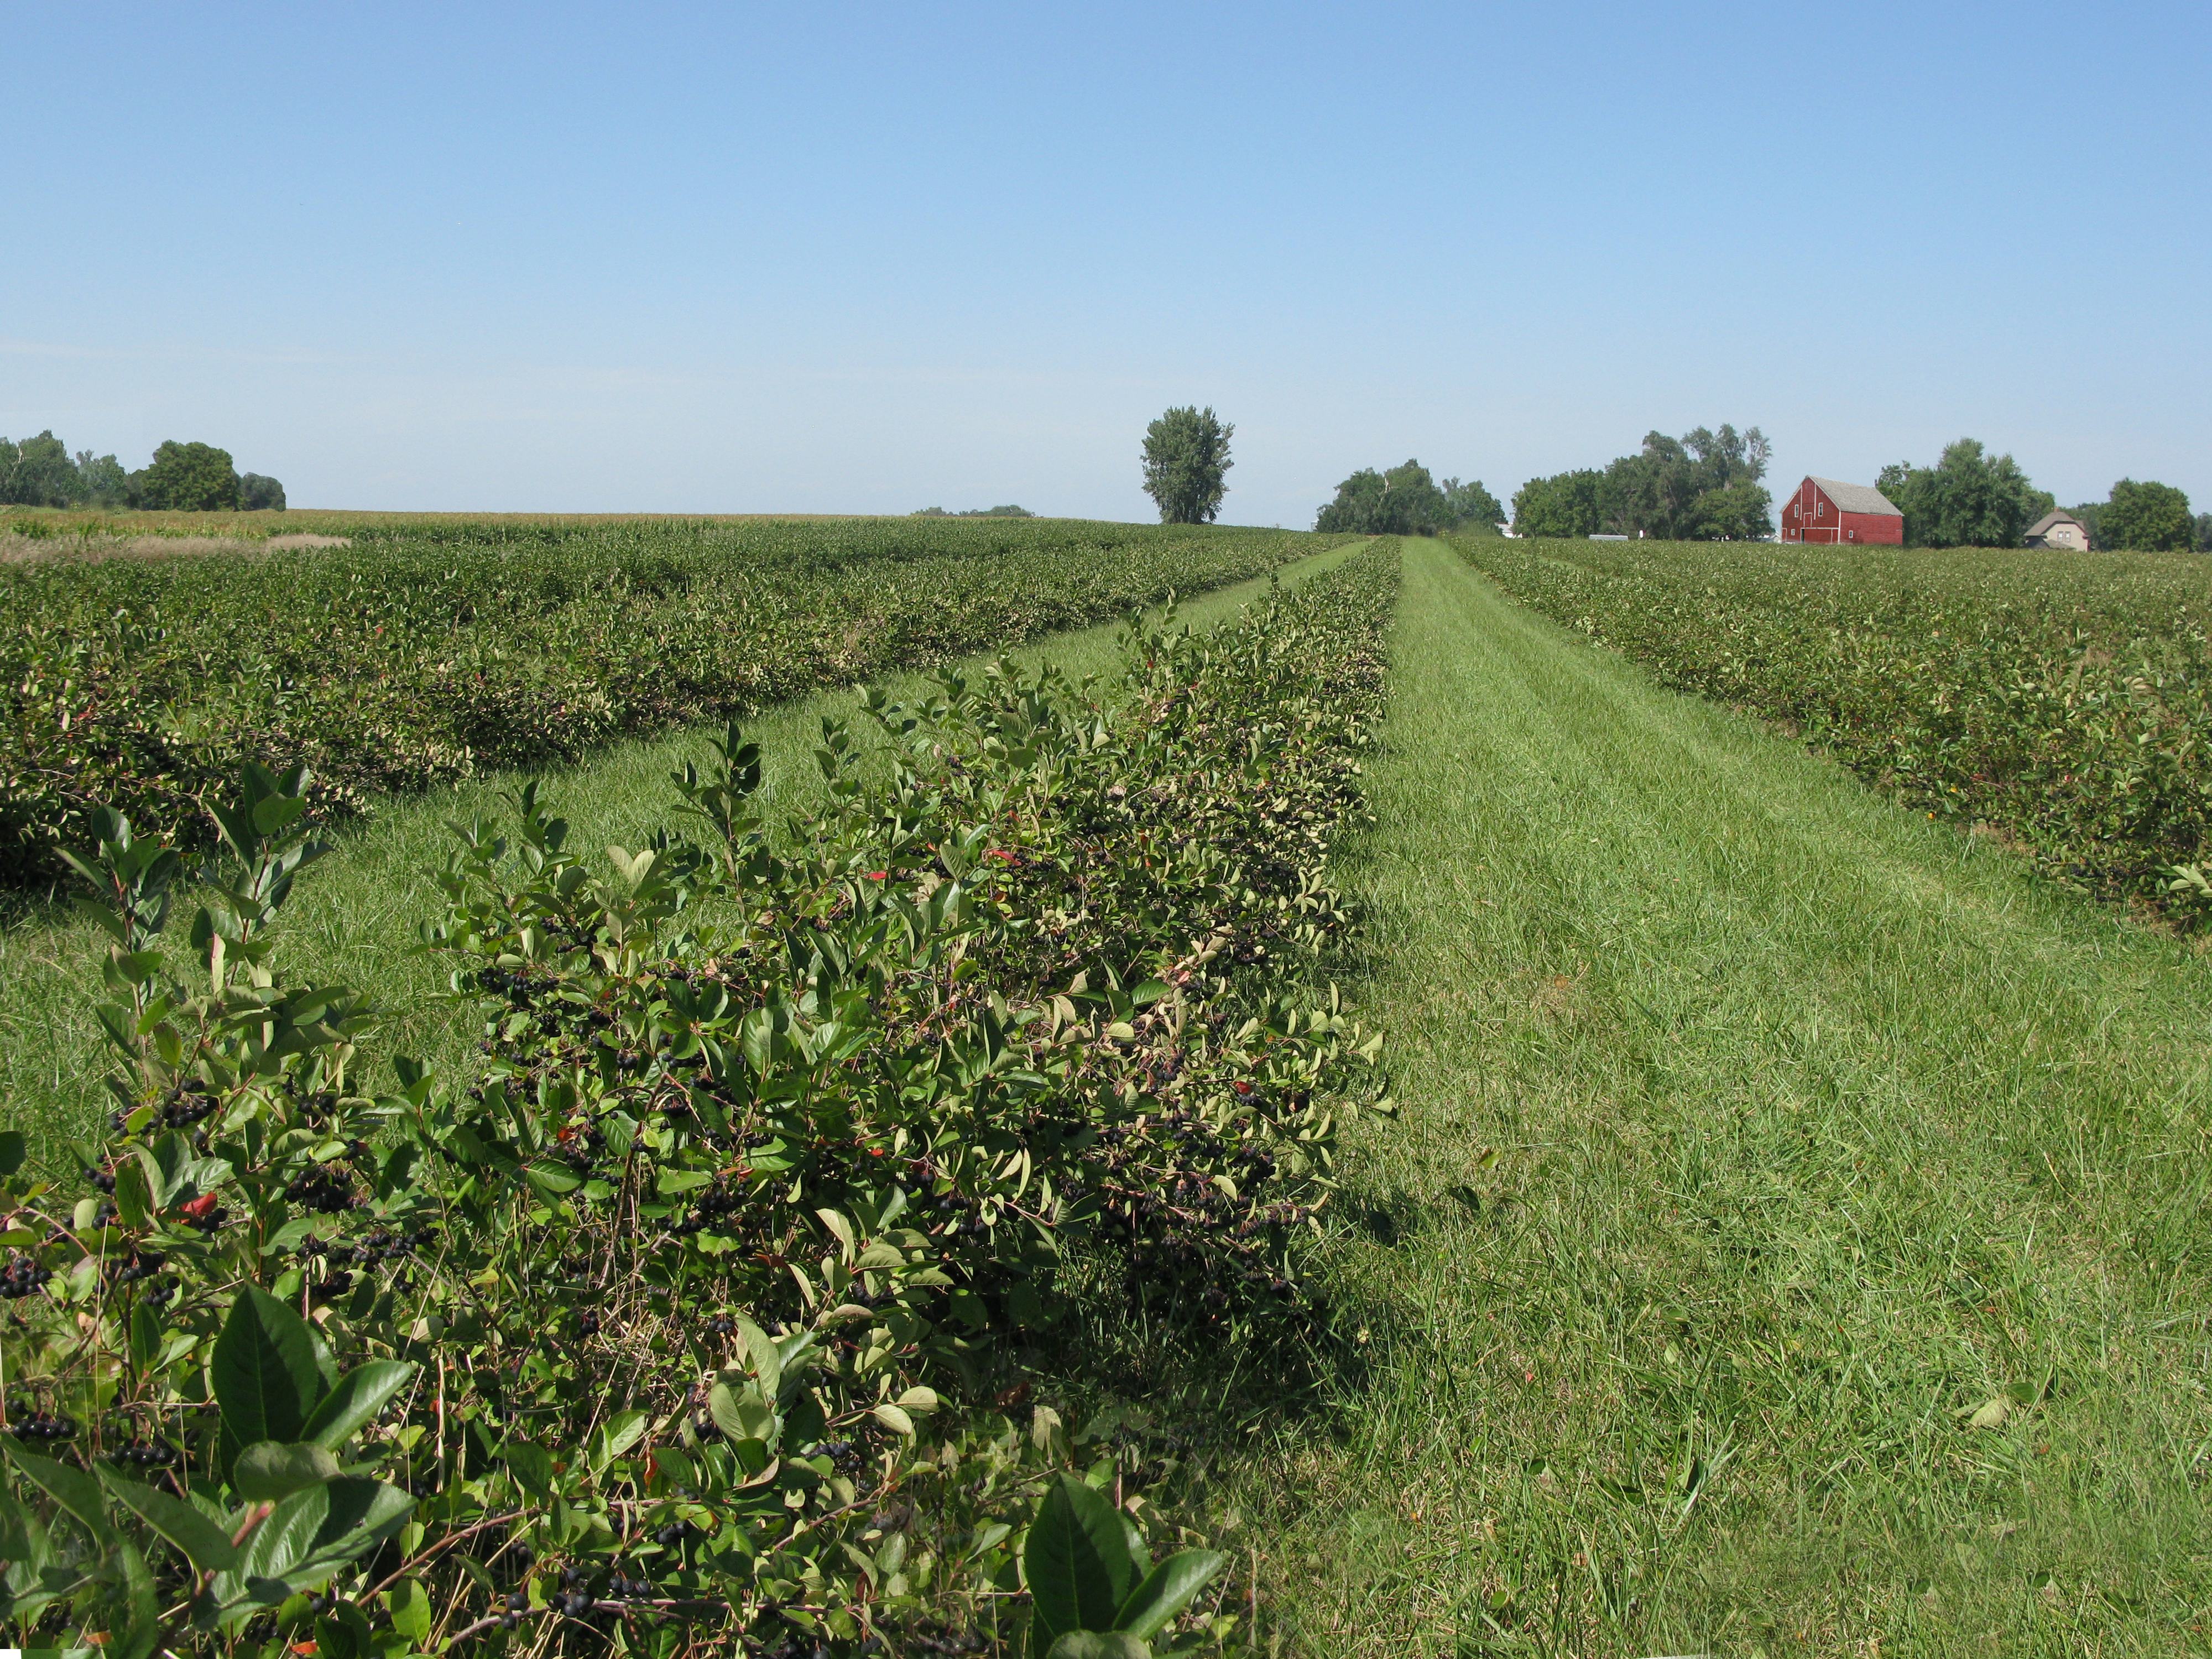 A growing number of farmers throughout the Midwestern US—America’s heartland—are cultivating Aronia on its native soil, poised for the resurgence of this antioxidant, anti-inflammatory powerhouse.